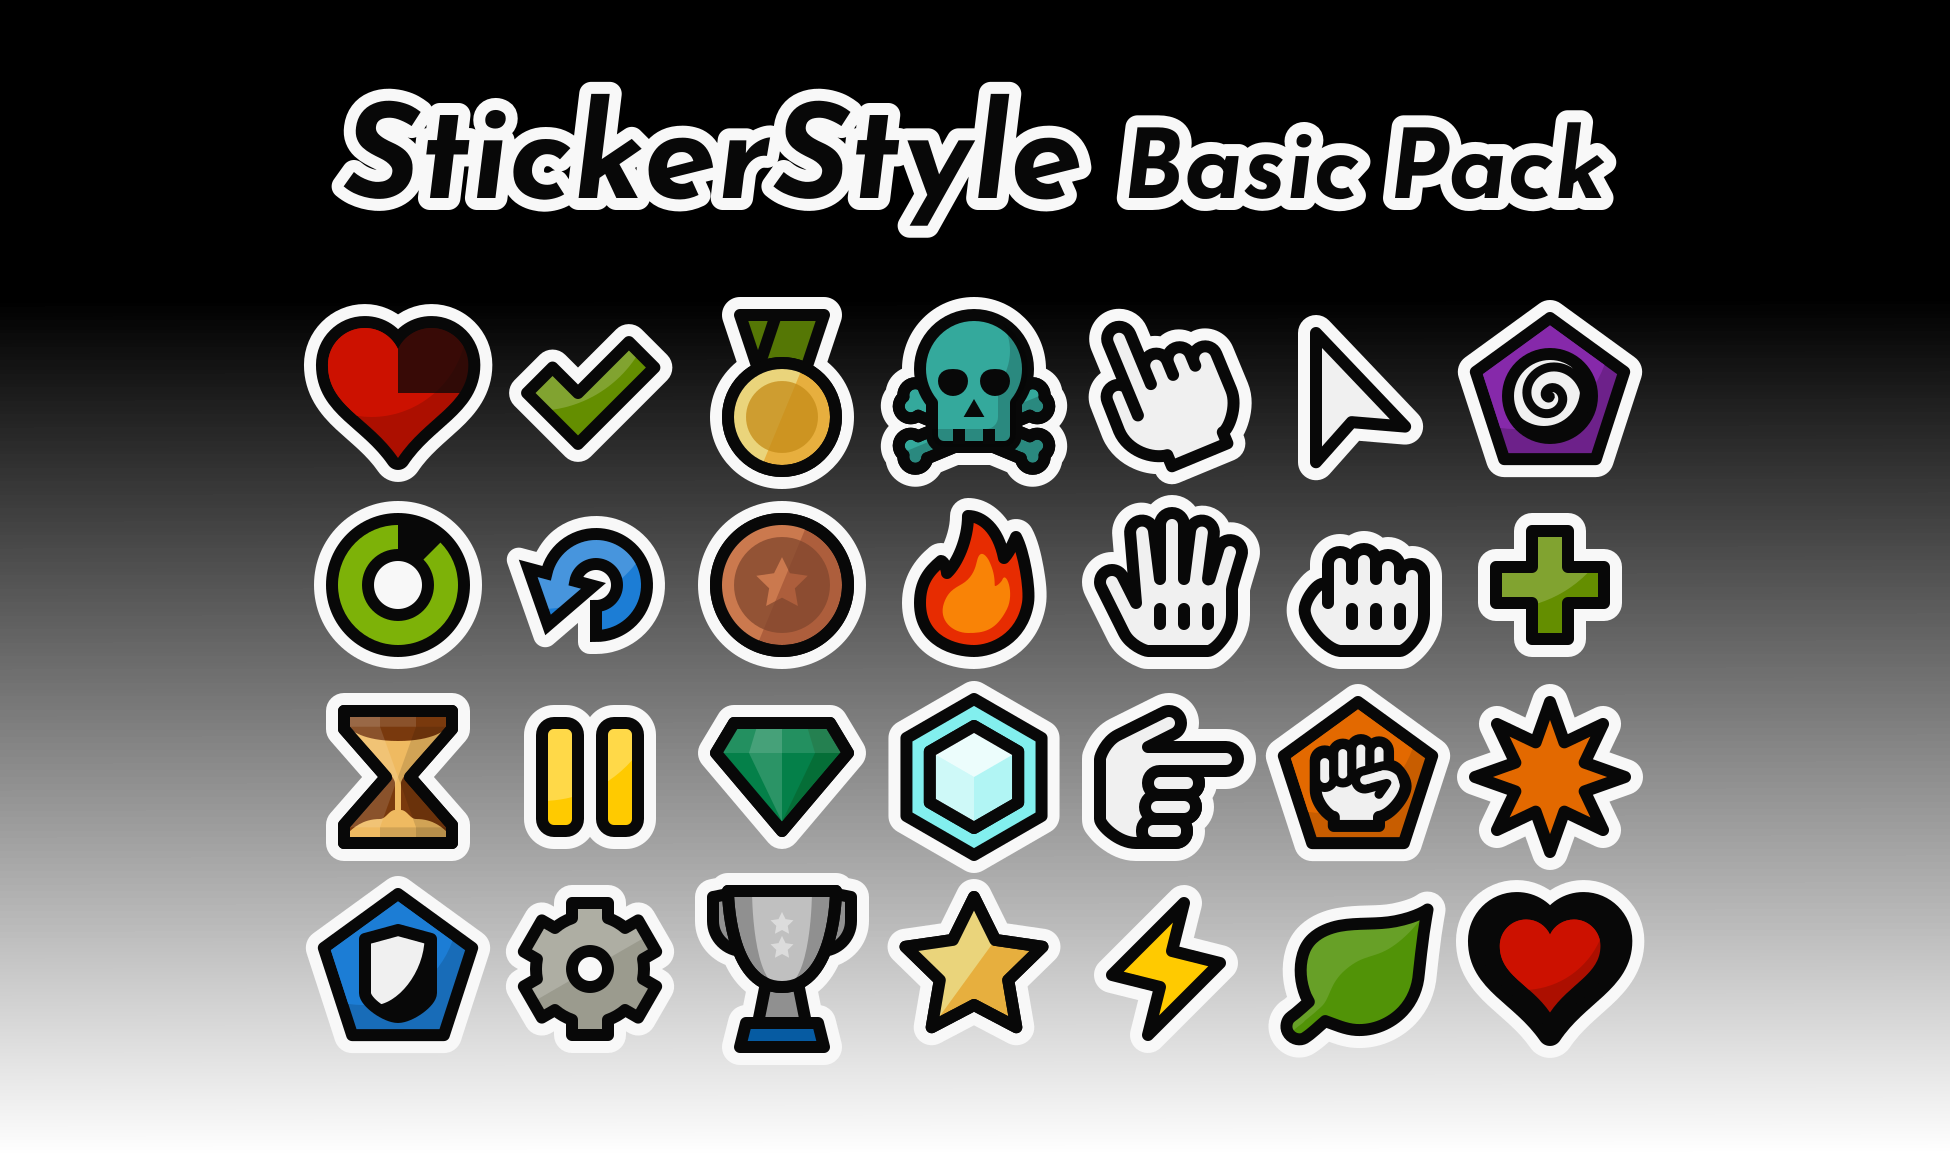 StickerStyle Basic Pack